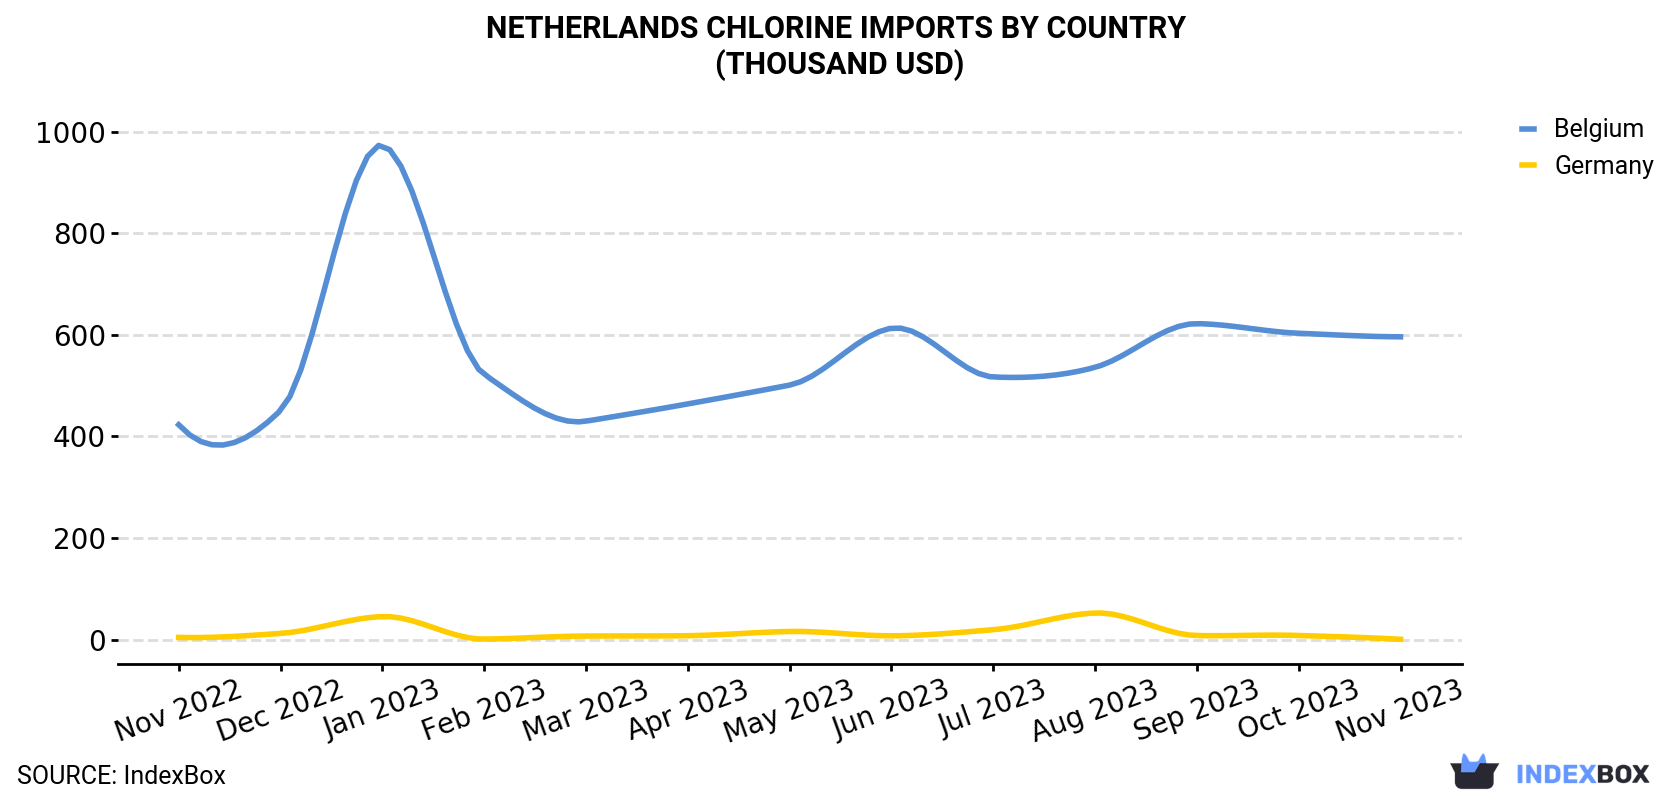 Netherlands Chlorine Imports By Country (Thousand USD)